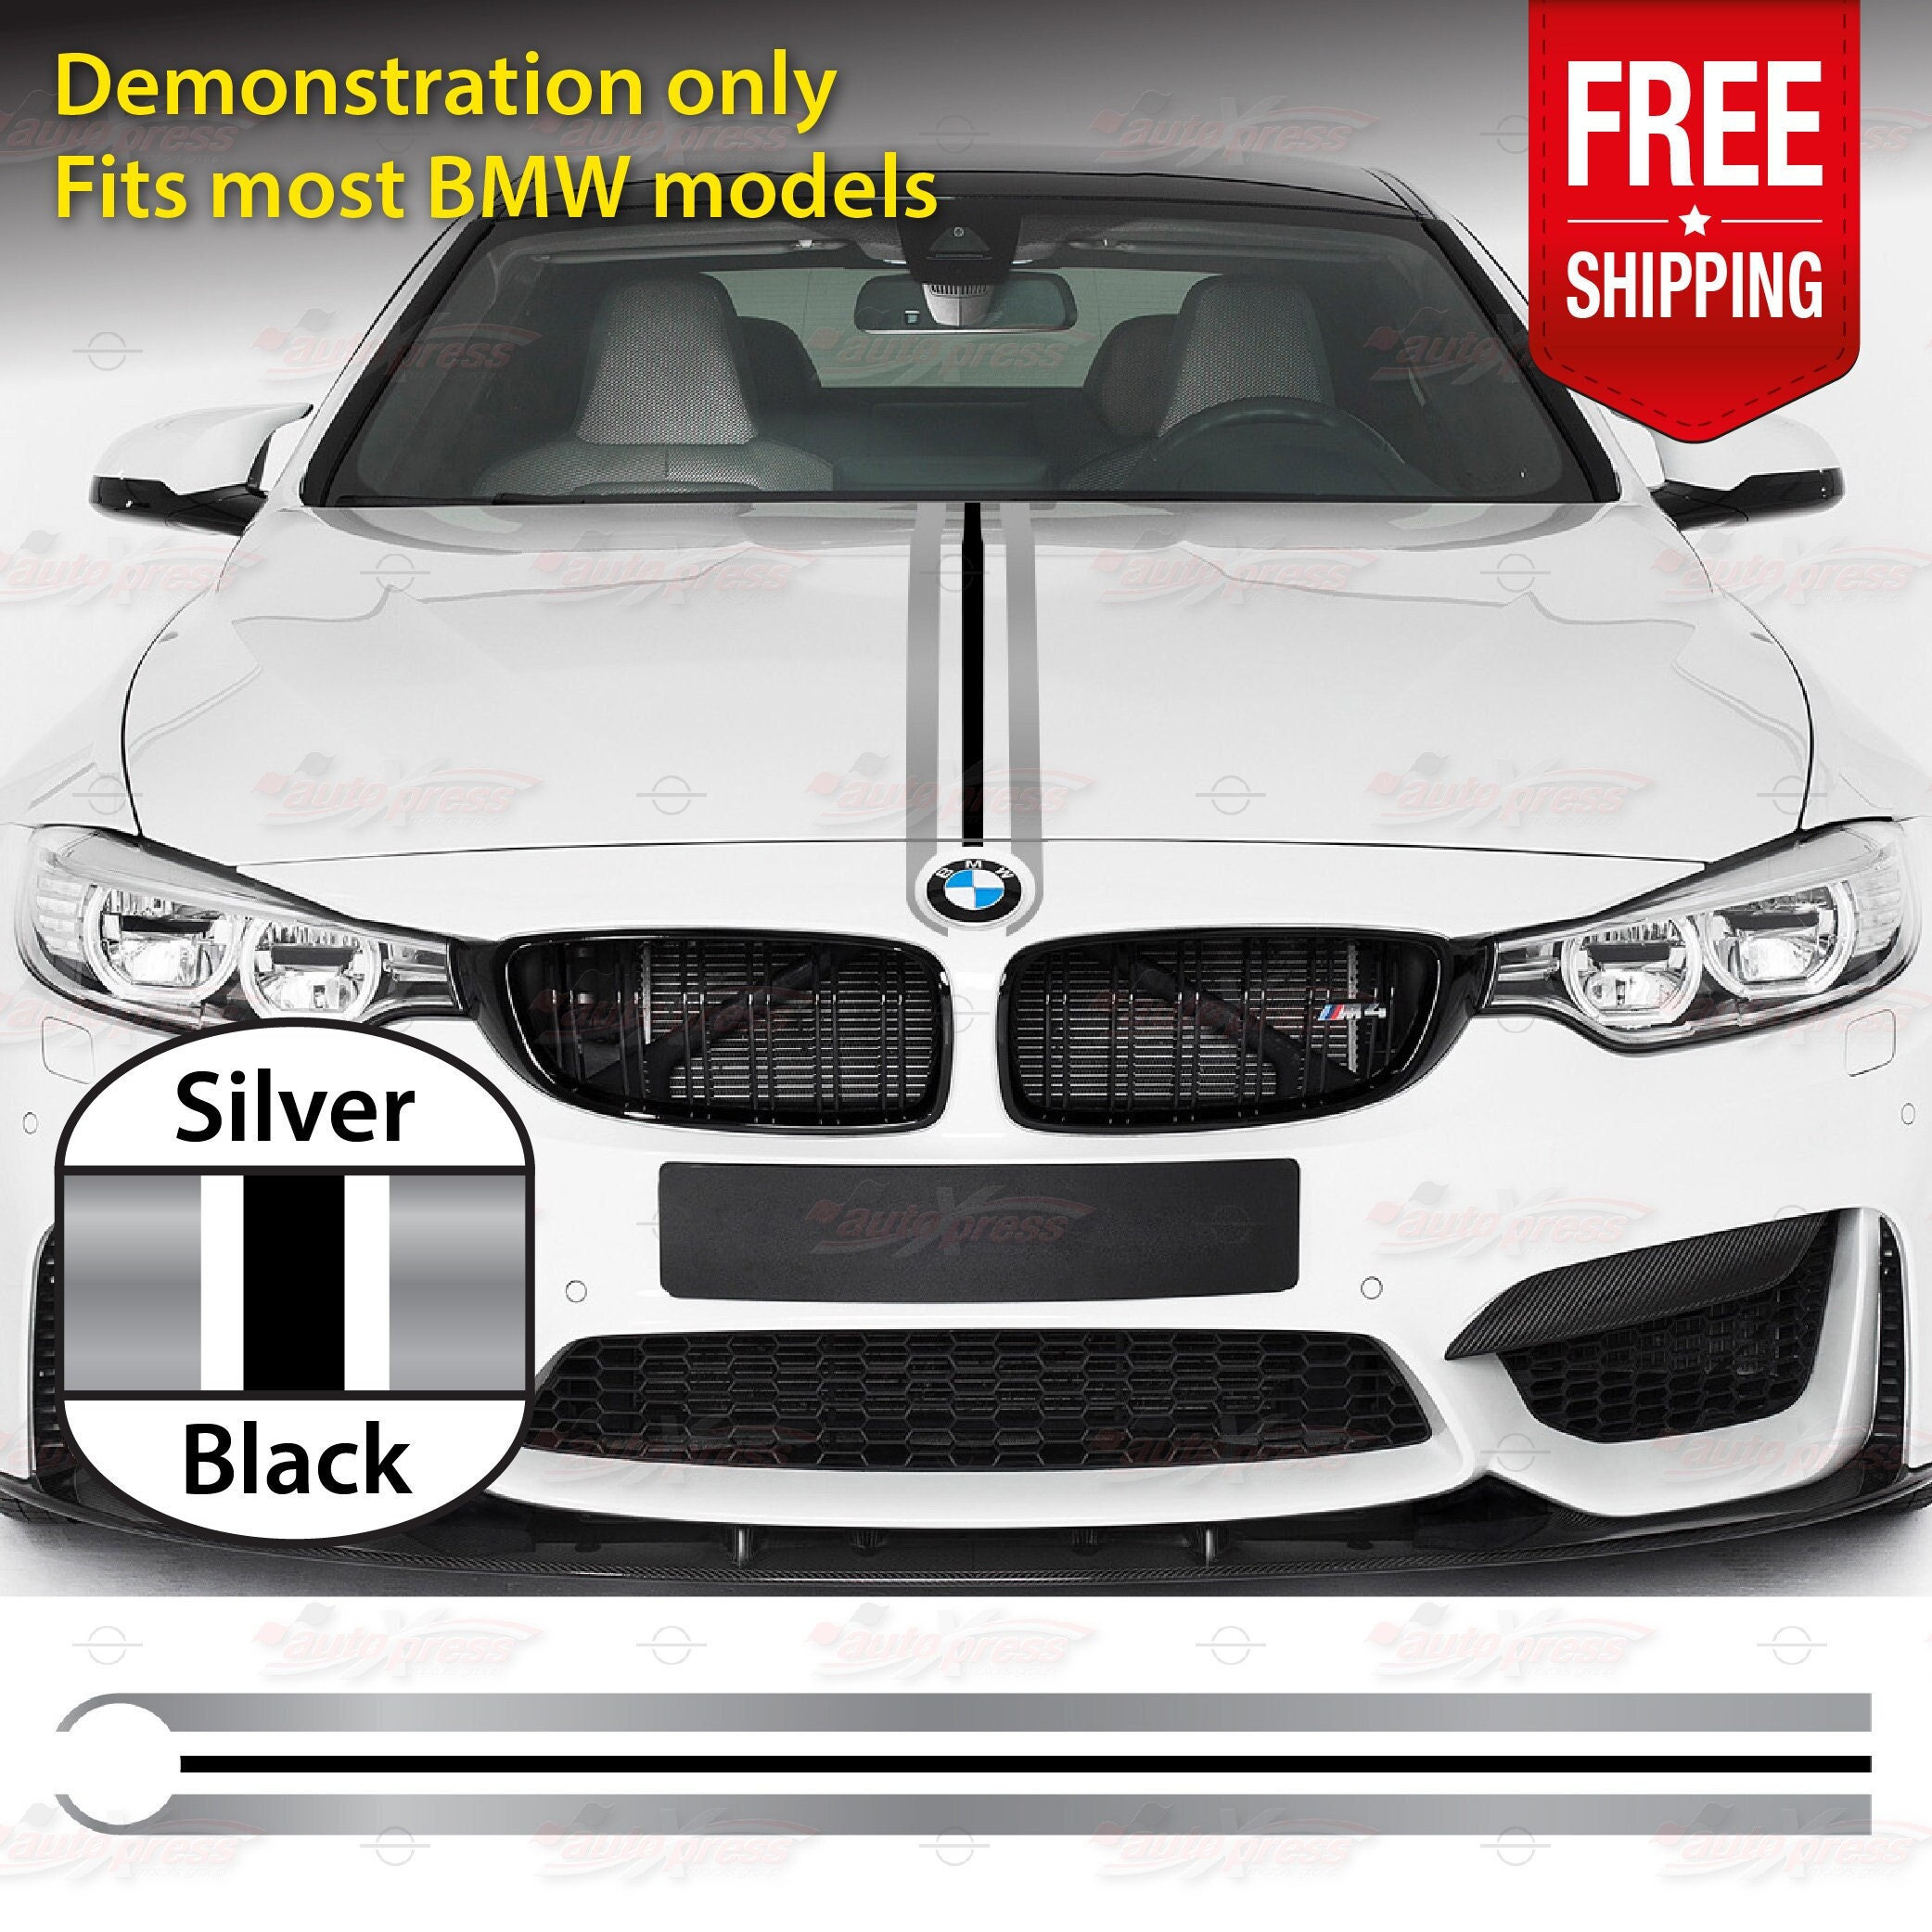 SILVER & BLACK Trim Performance Rally Graphic Line Car Engine Hood Bonnet Decal  Vinyl Stickers for All BMW Autoxpress 